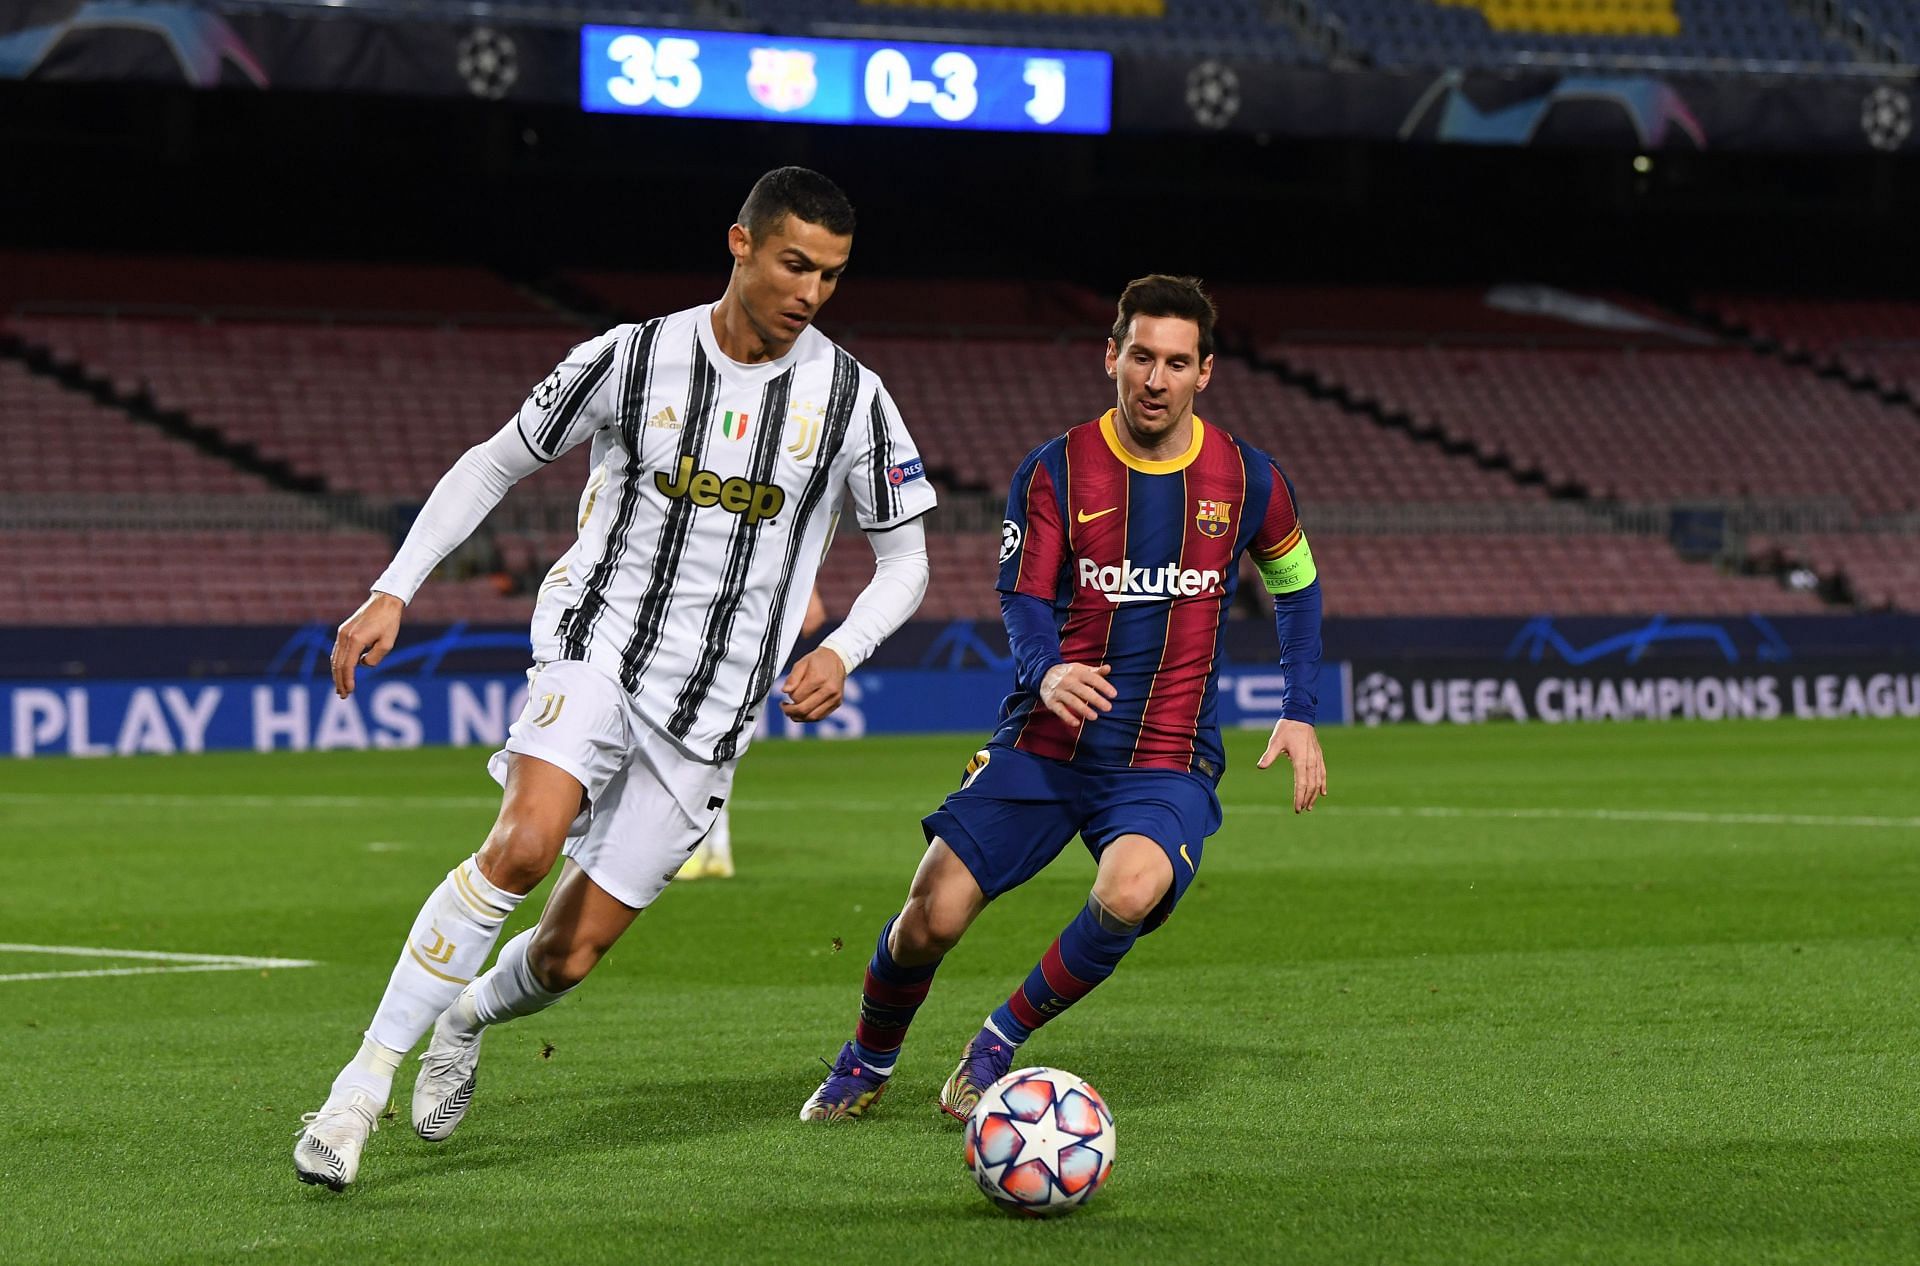 Lionel Messi and Cristiano Ronaldo sit atop the assist charts in Champions League history